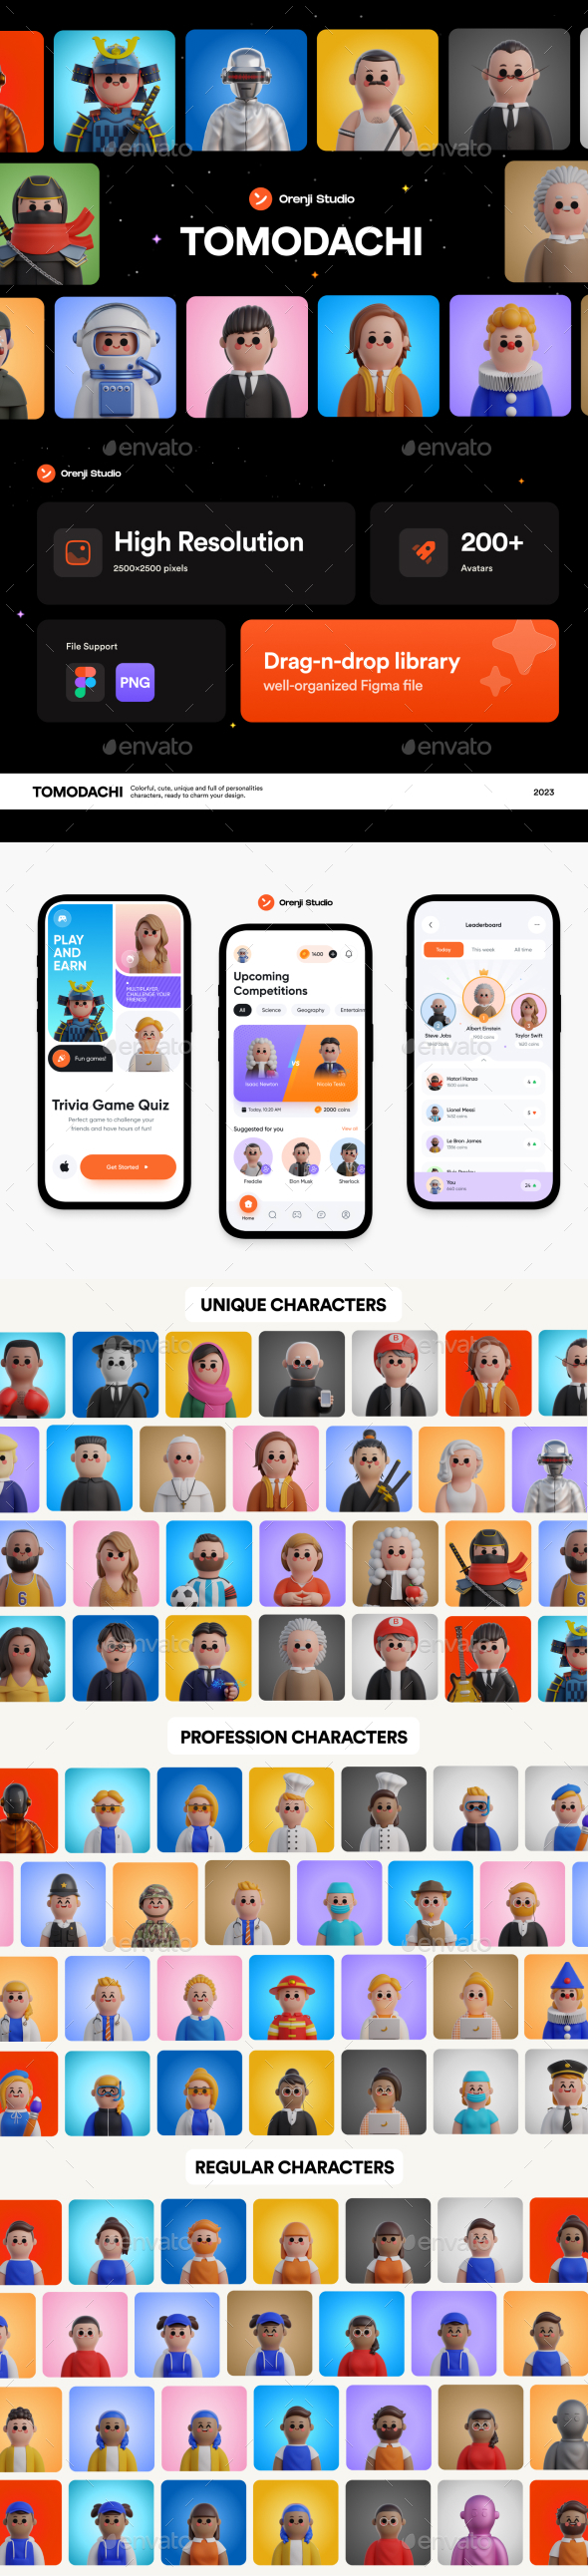 [DOWNLOAD]Tomodachi - 3D Avatar Library by Orenji